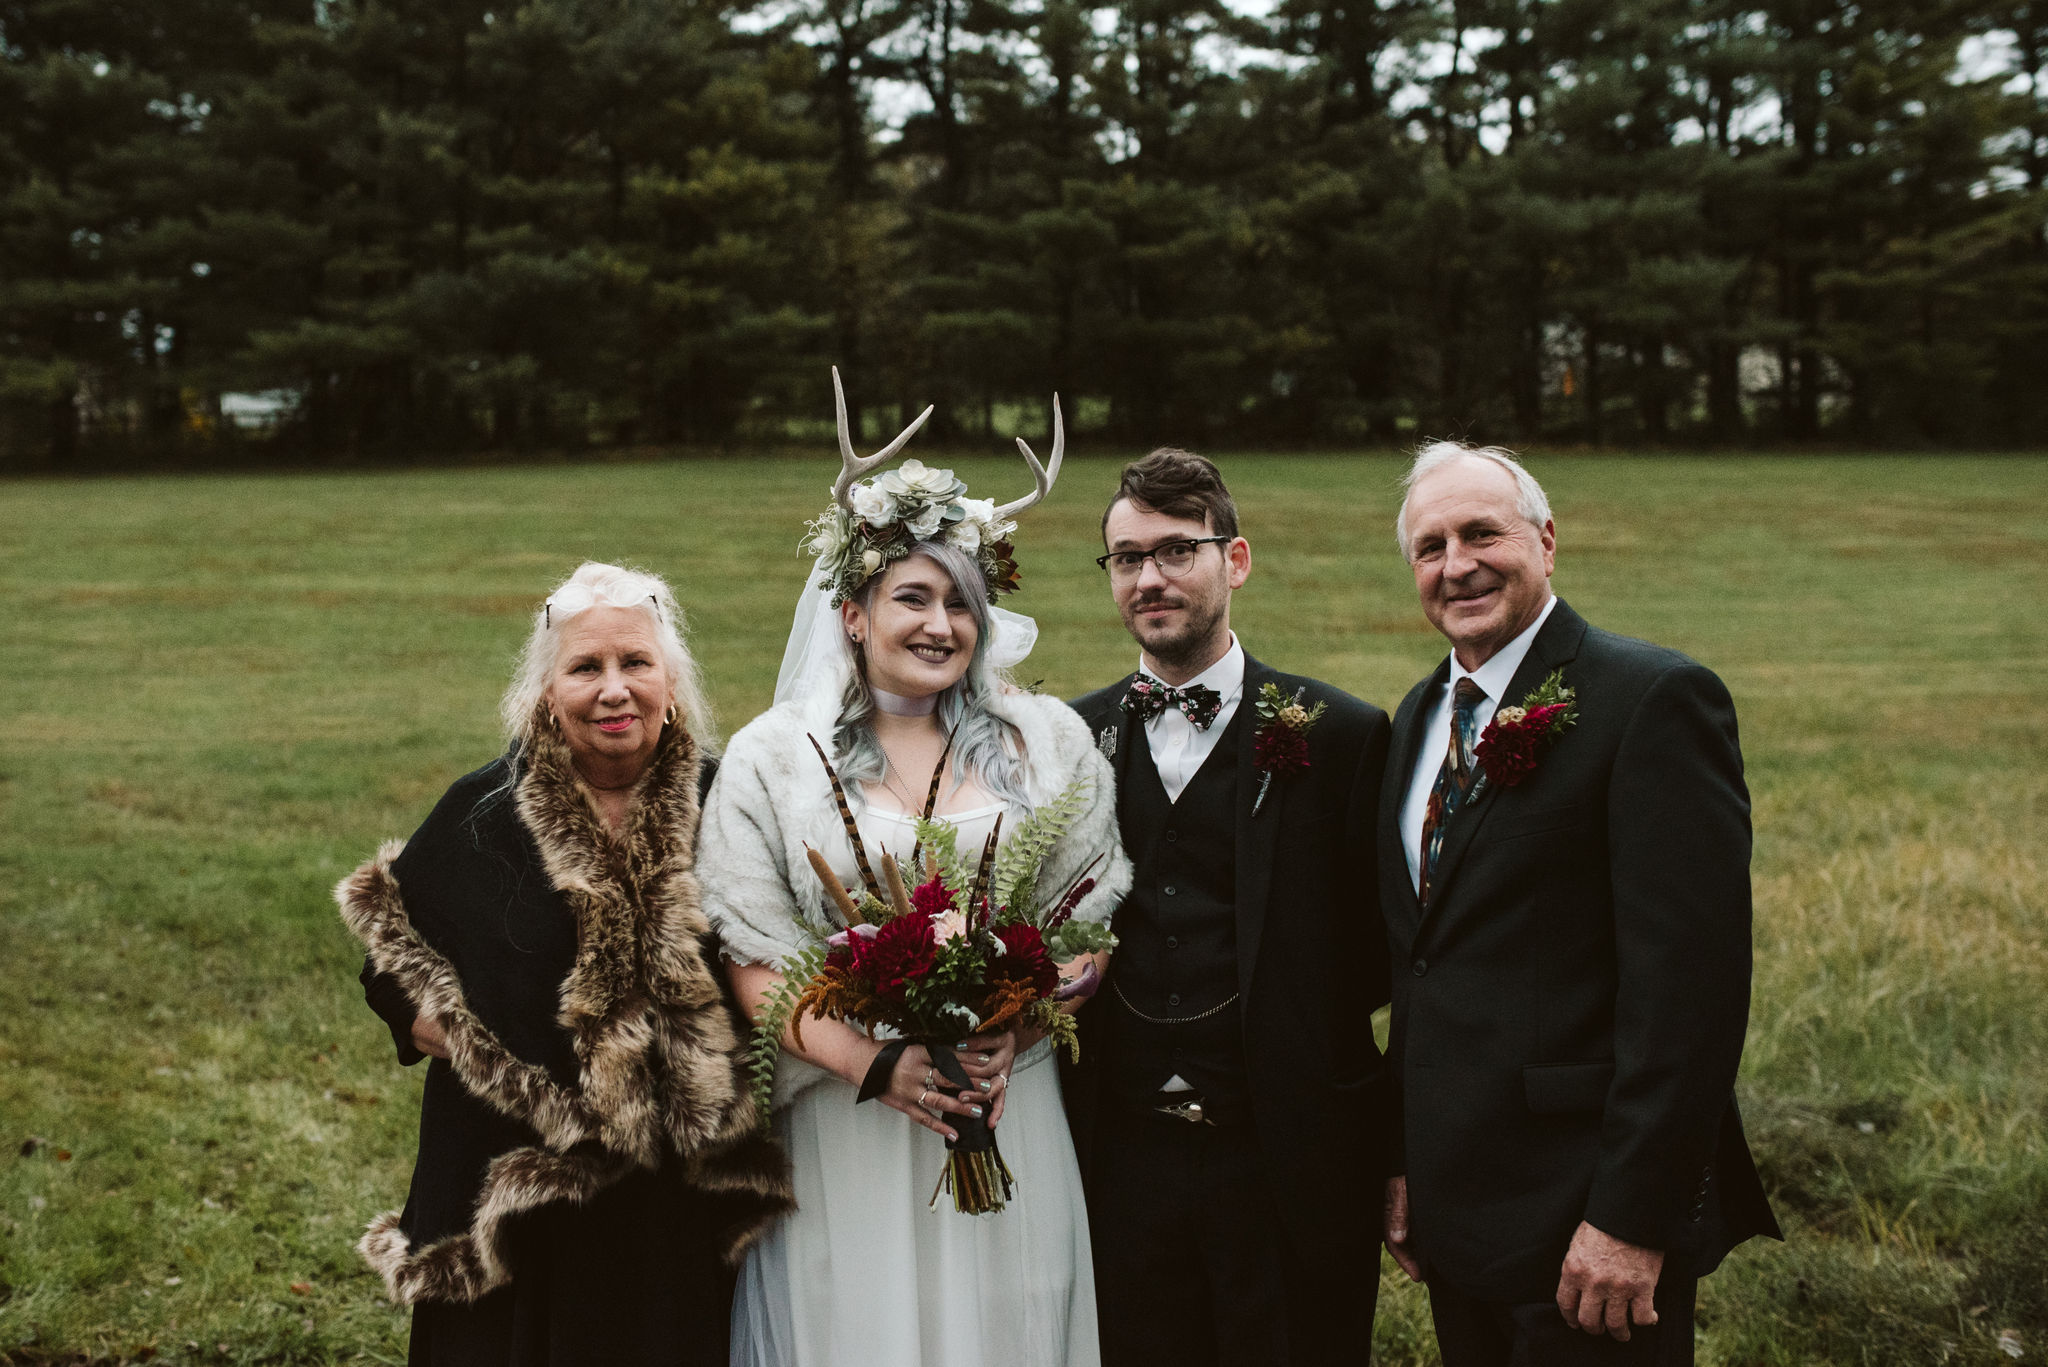  Maryland, Baltimore Wedding Photographer, Backyard Wedding, Fall, October, Dark Bohemian, Whimsical, Fun, Portrait of Bride and Groom with Parents, The Modest Florist 